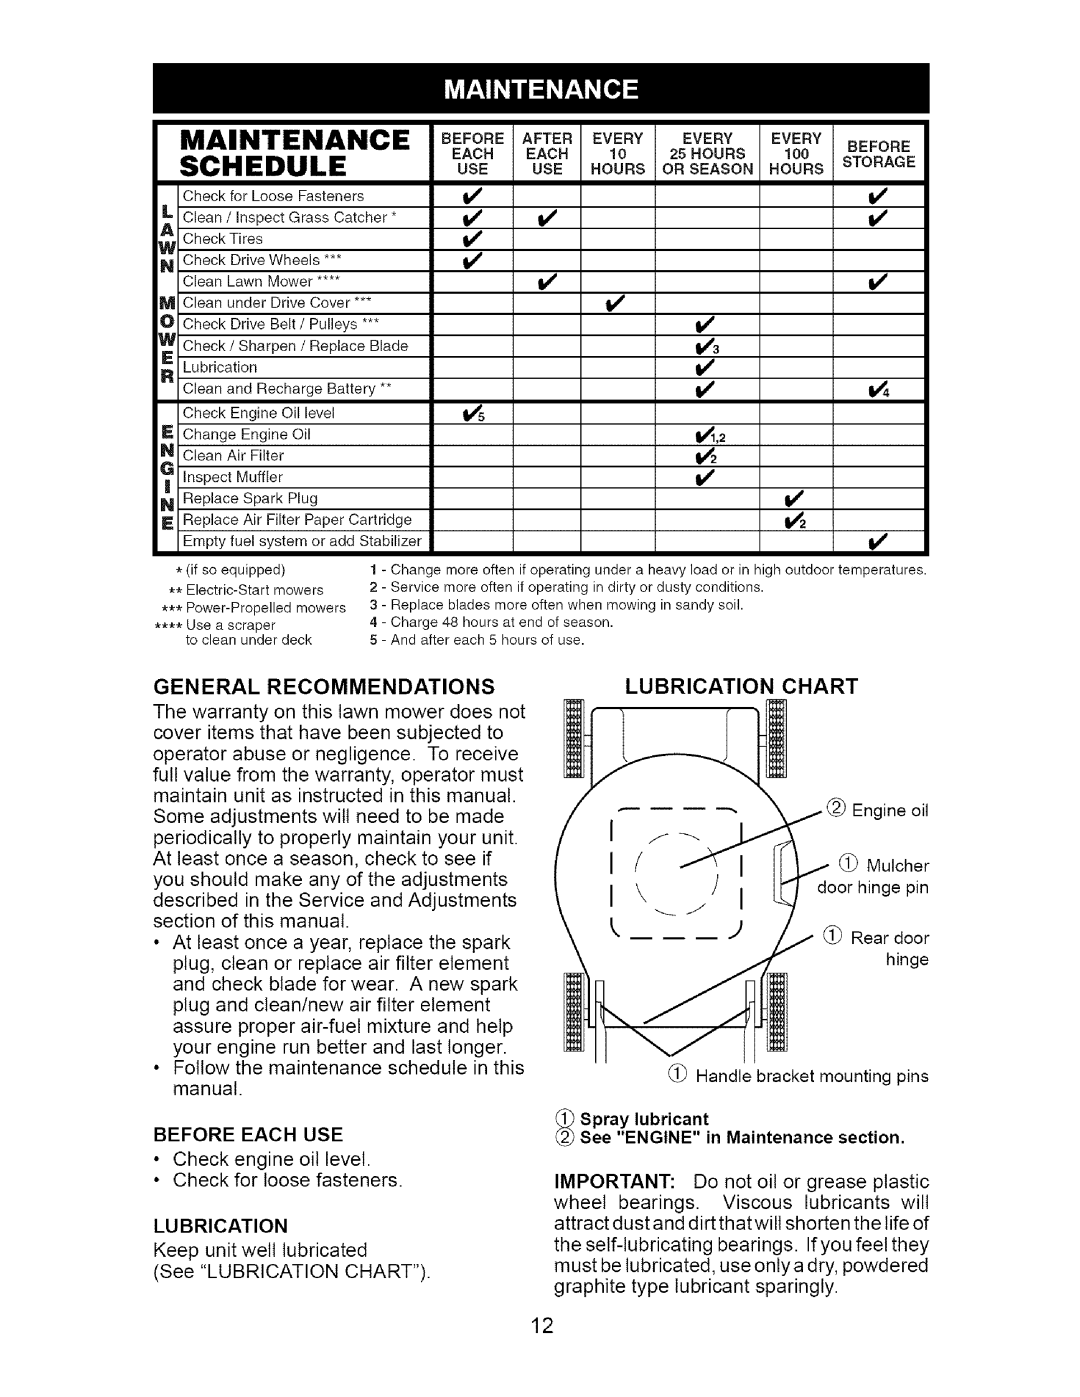 Craftsman 917.37181 owner manual Schedule, Lubrication Chart, General Recommendations, _ Spray lubricant 